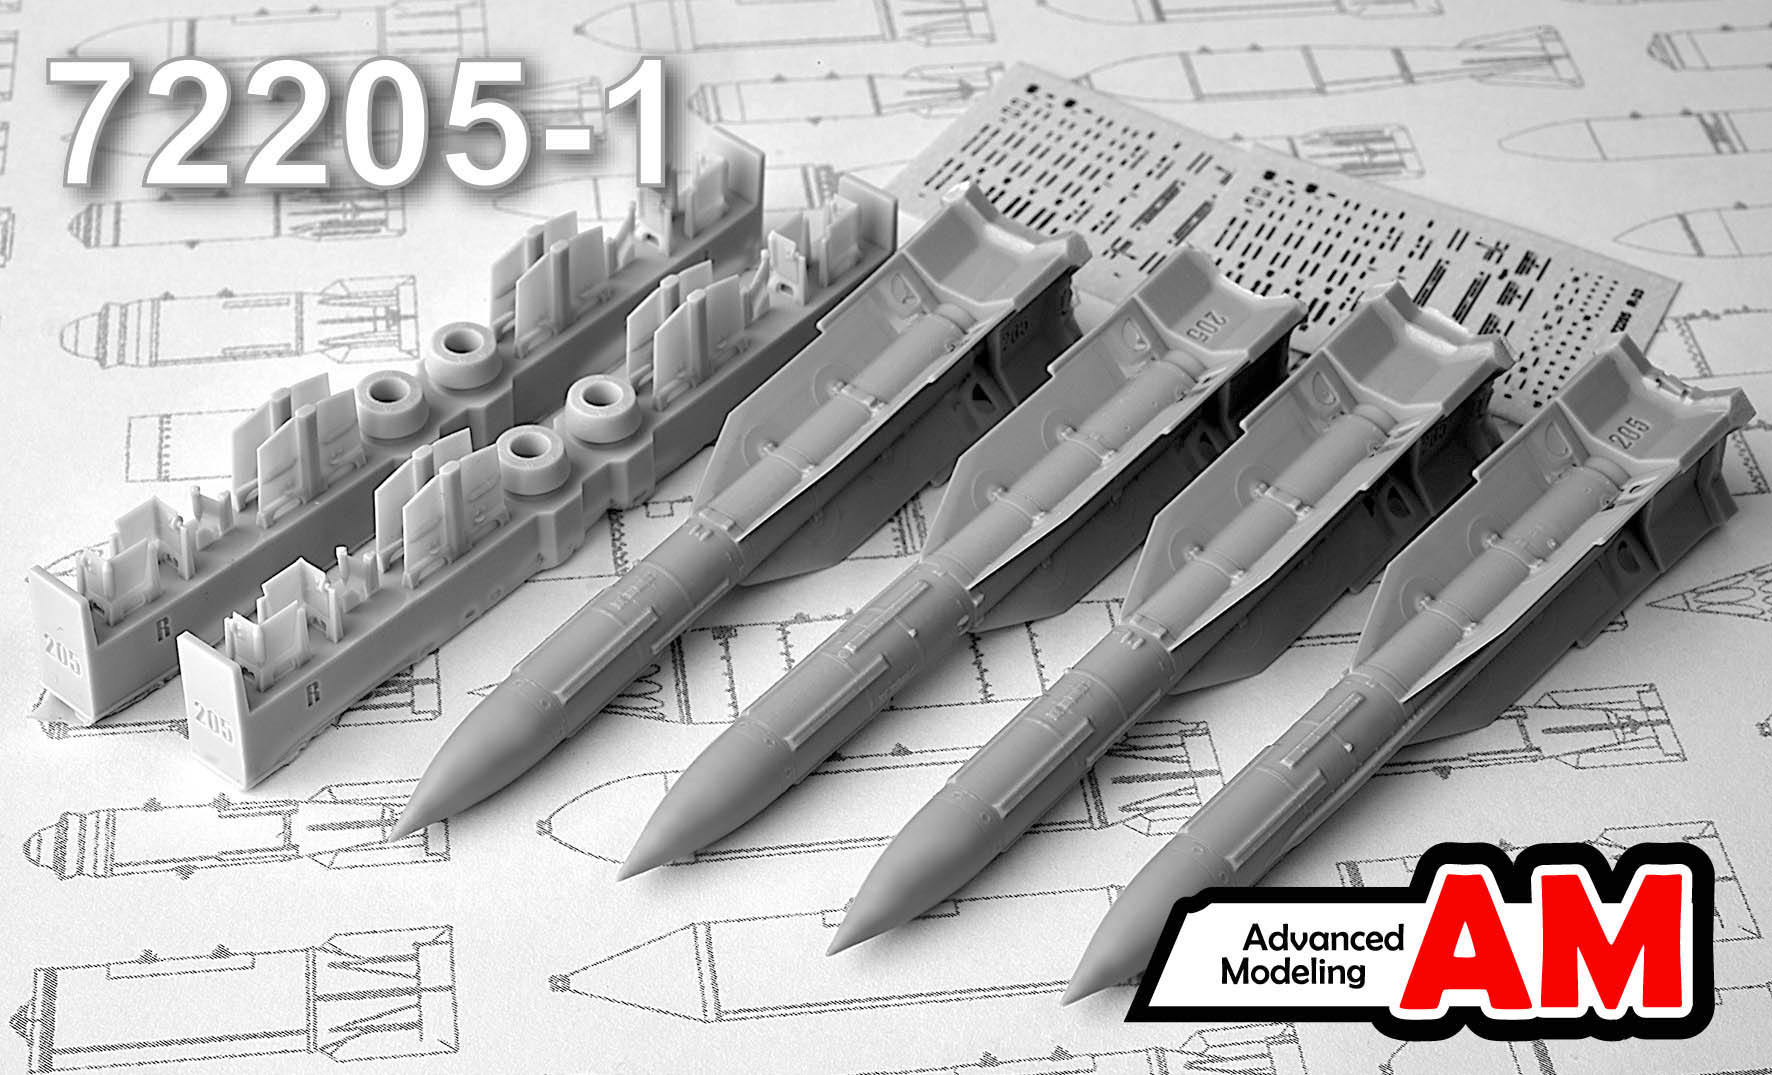 Additions (3D resin printing) 1/72 R-33 Air to Air missile (Advanced Modeling) 